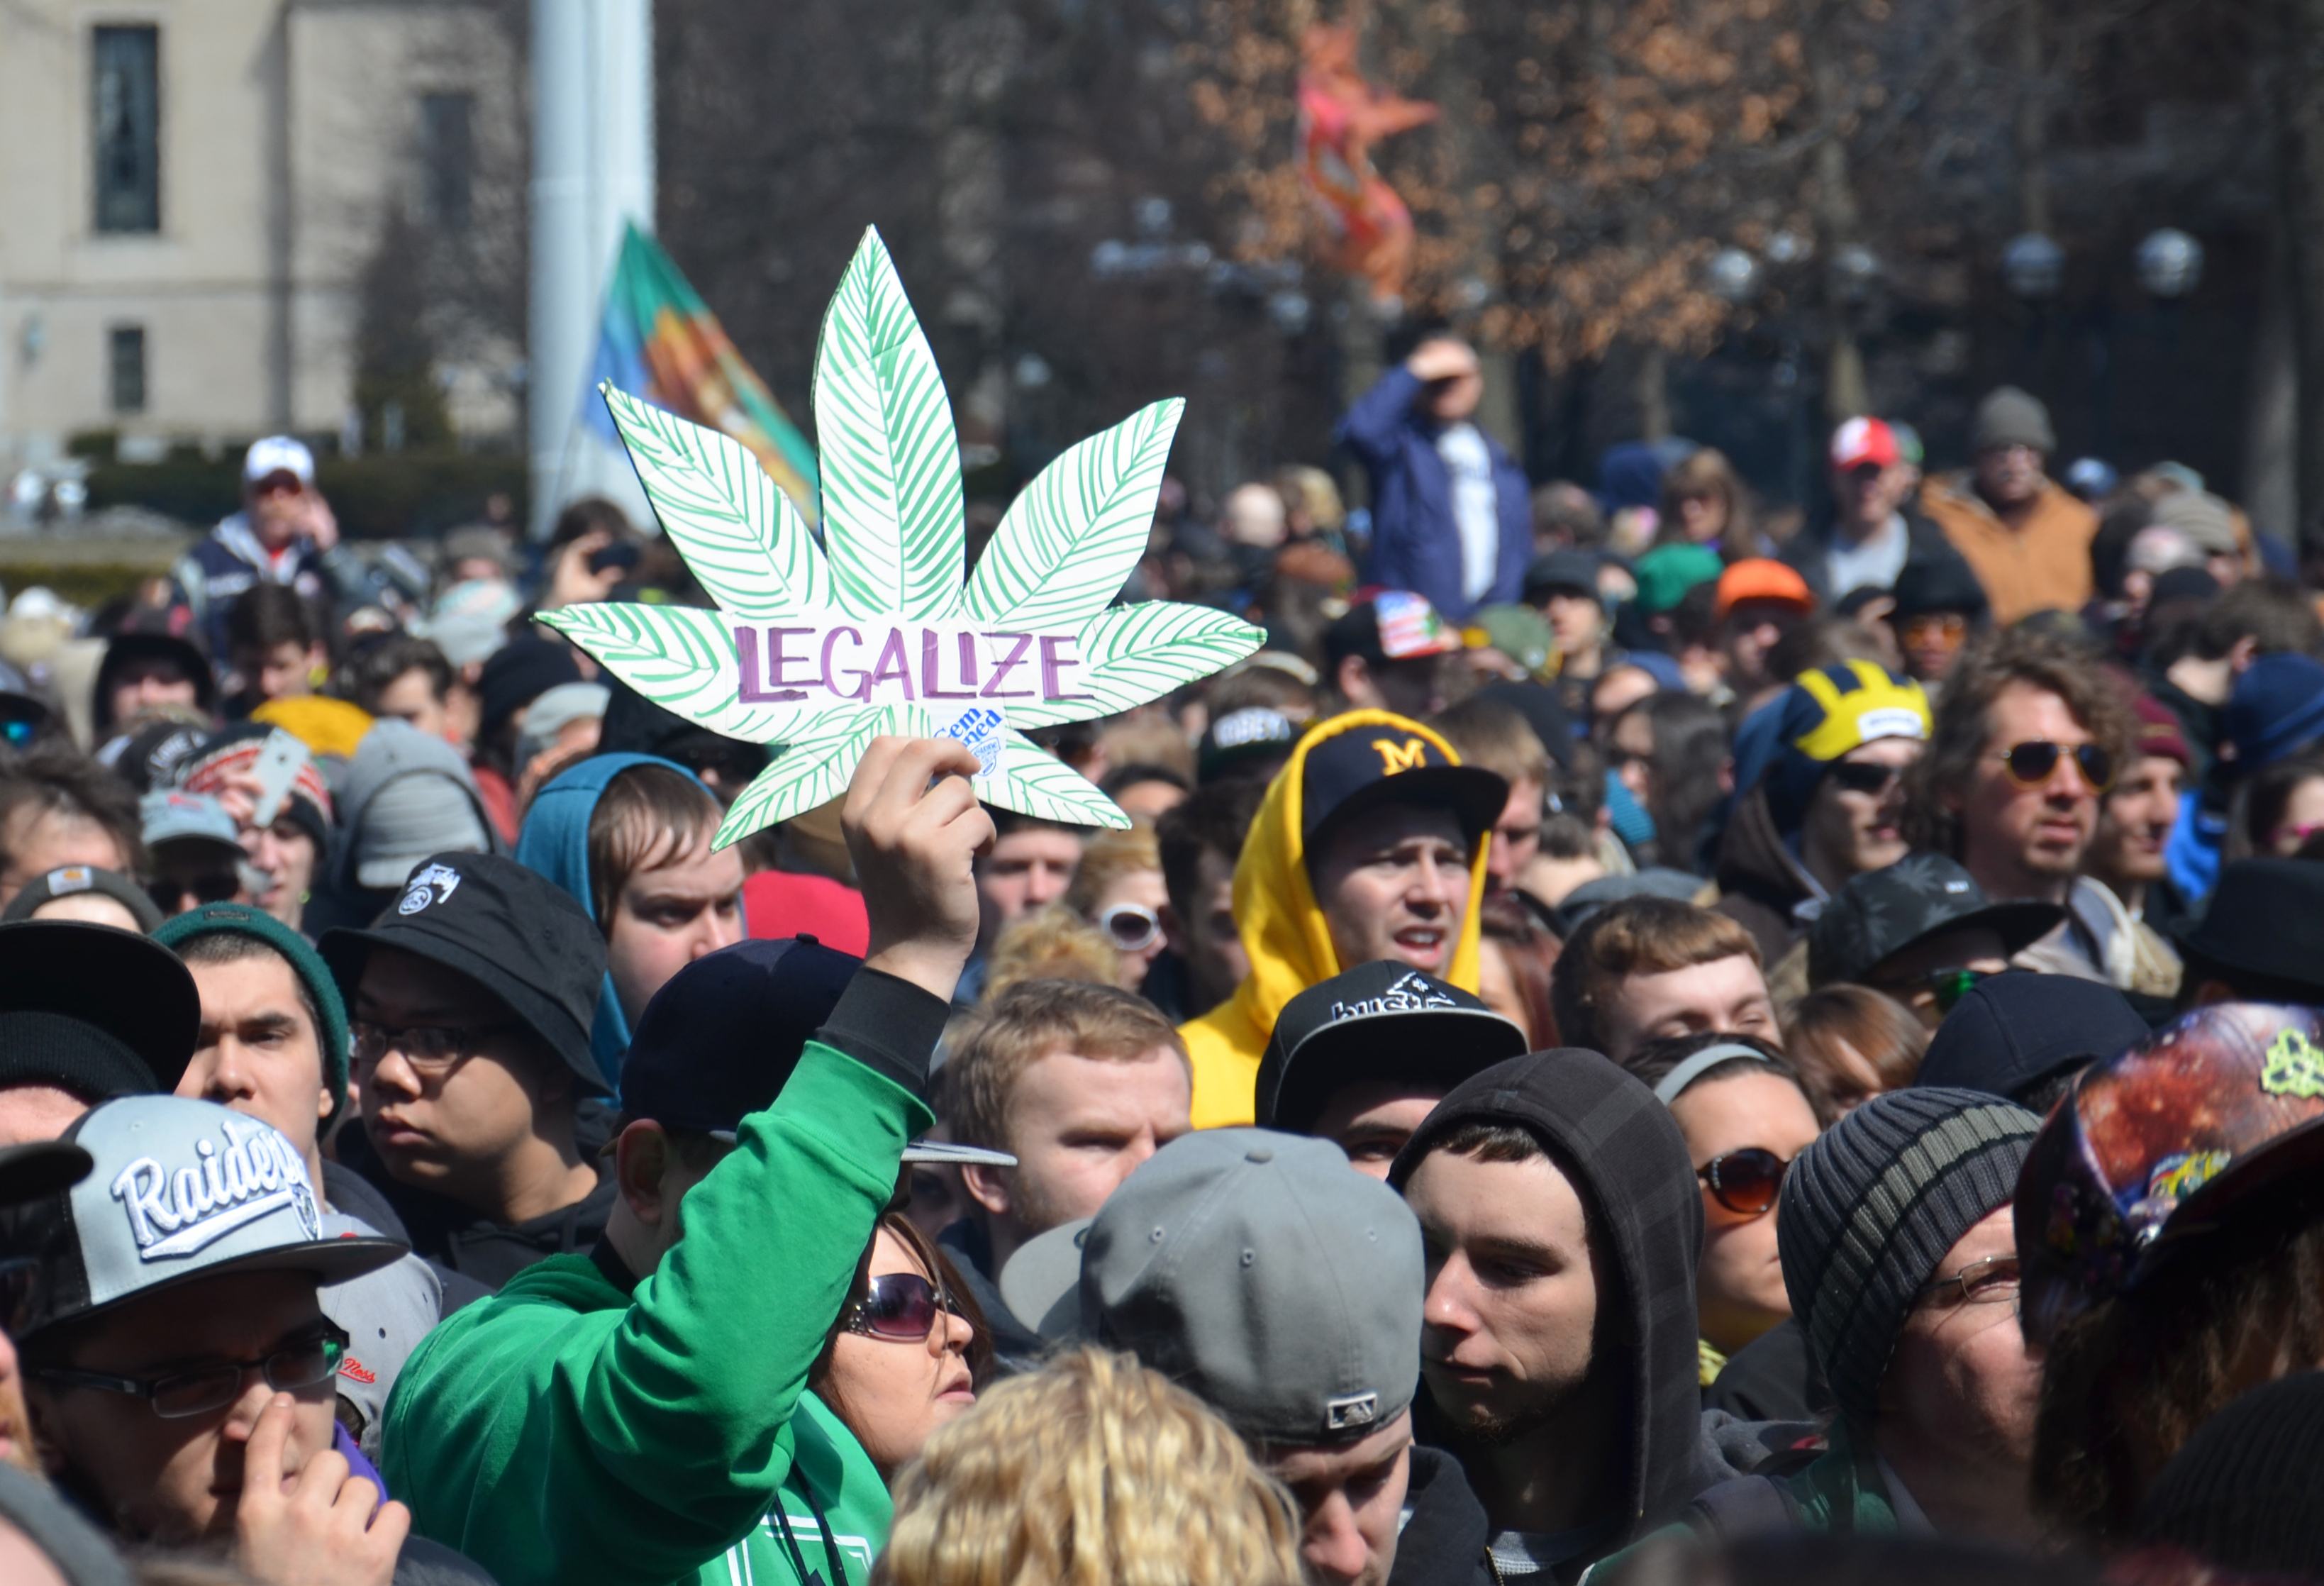 A large group of people are gathered with one person holding up a Marijuana leaf sign that says Legalize.